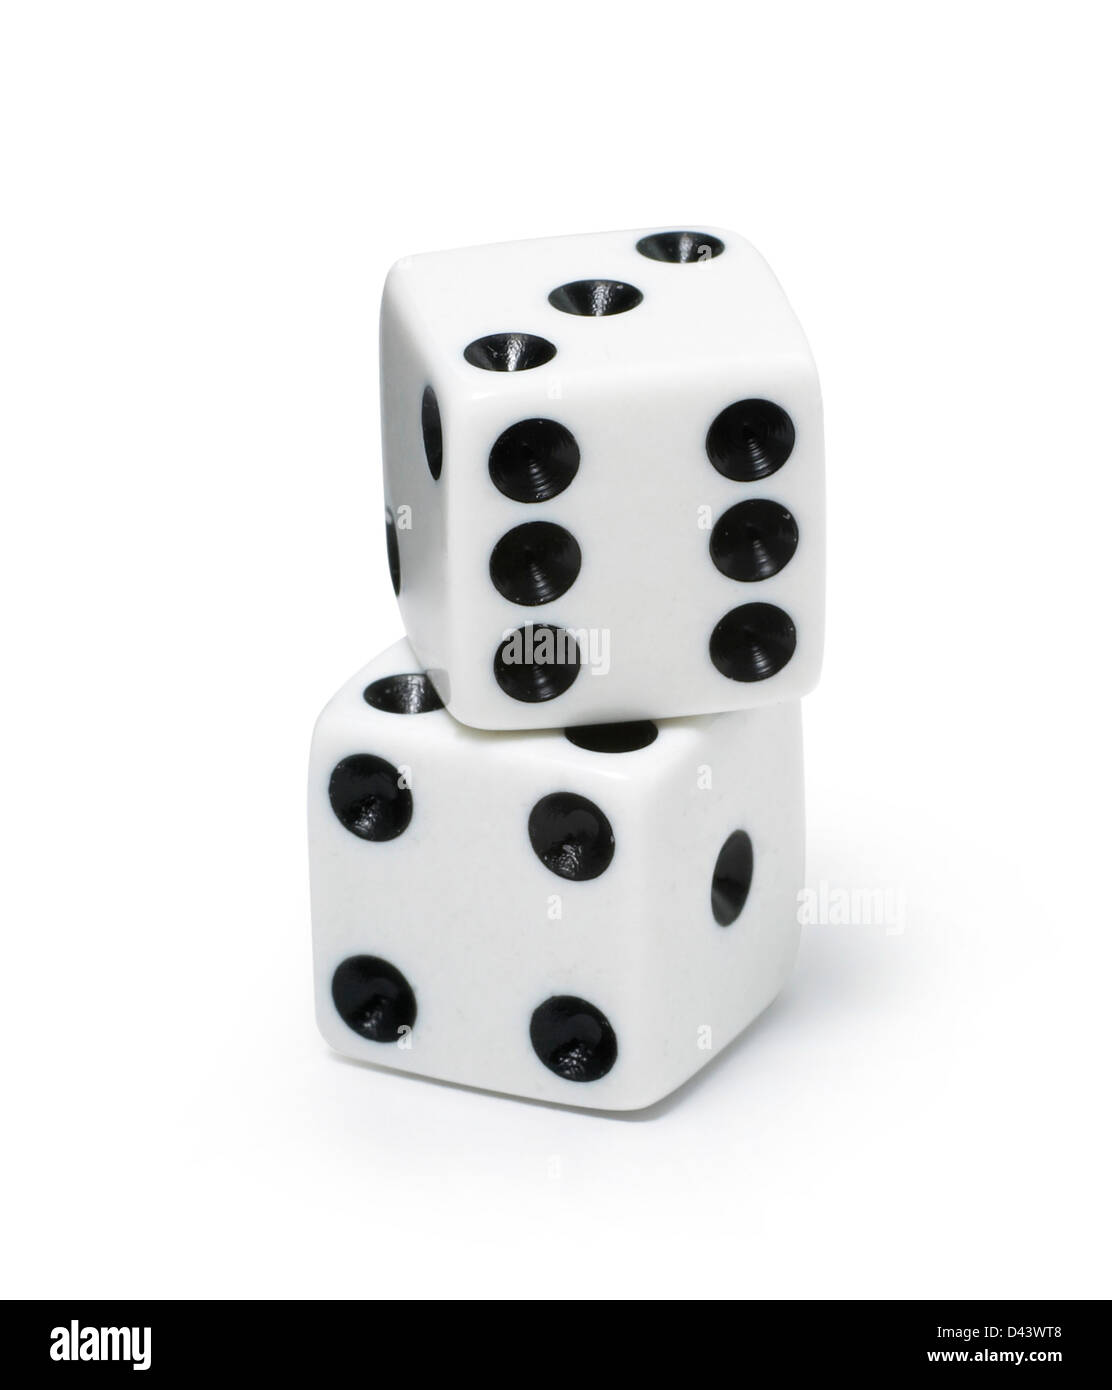 Two Dice Roll, Background, Number, Stack PNG Transparent Image and Clipart  for Free Download